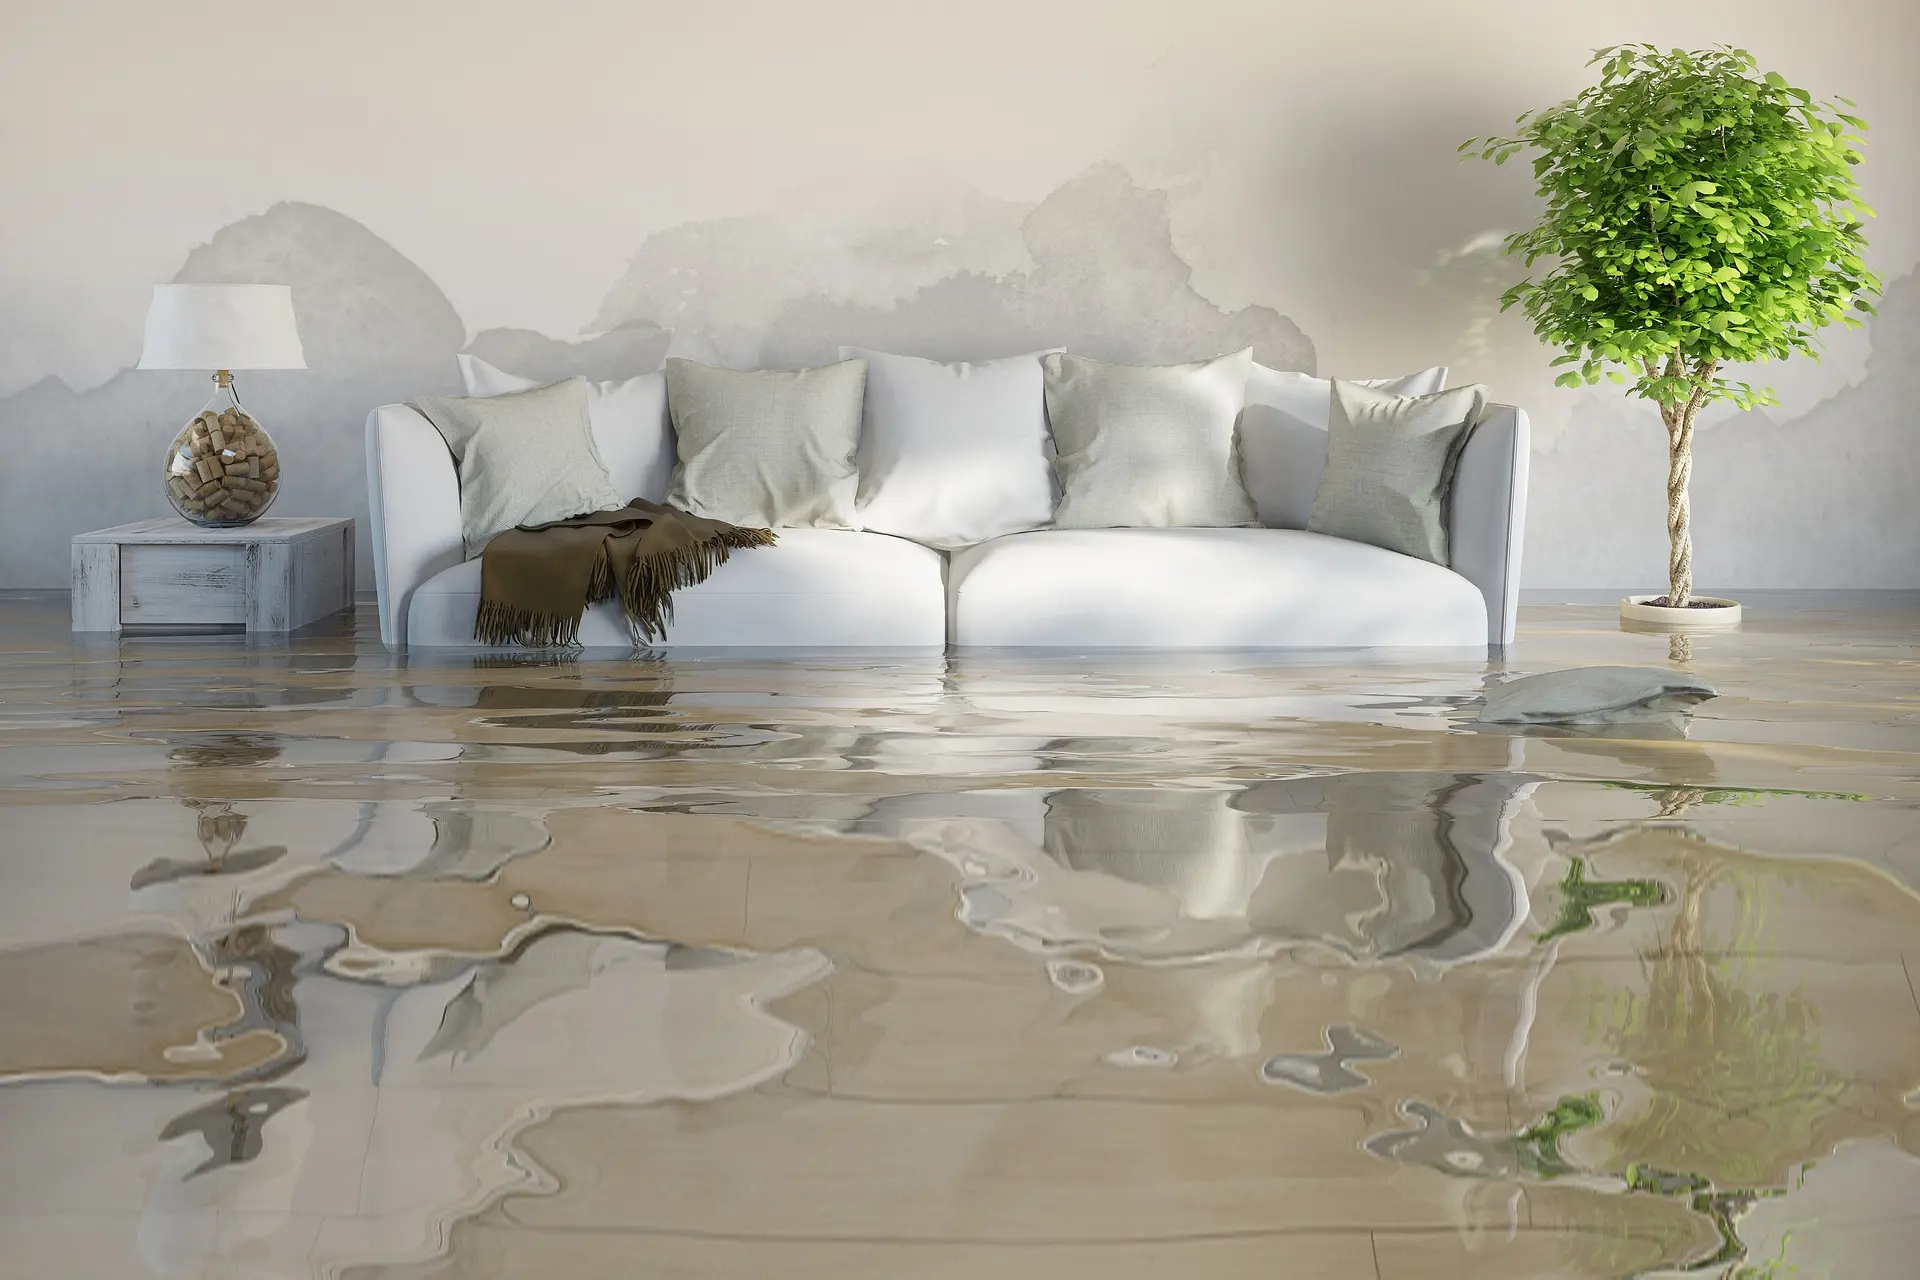 How to Handle Water Damage Emergencies: Professional Restoration Services in Plano Texas